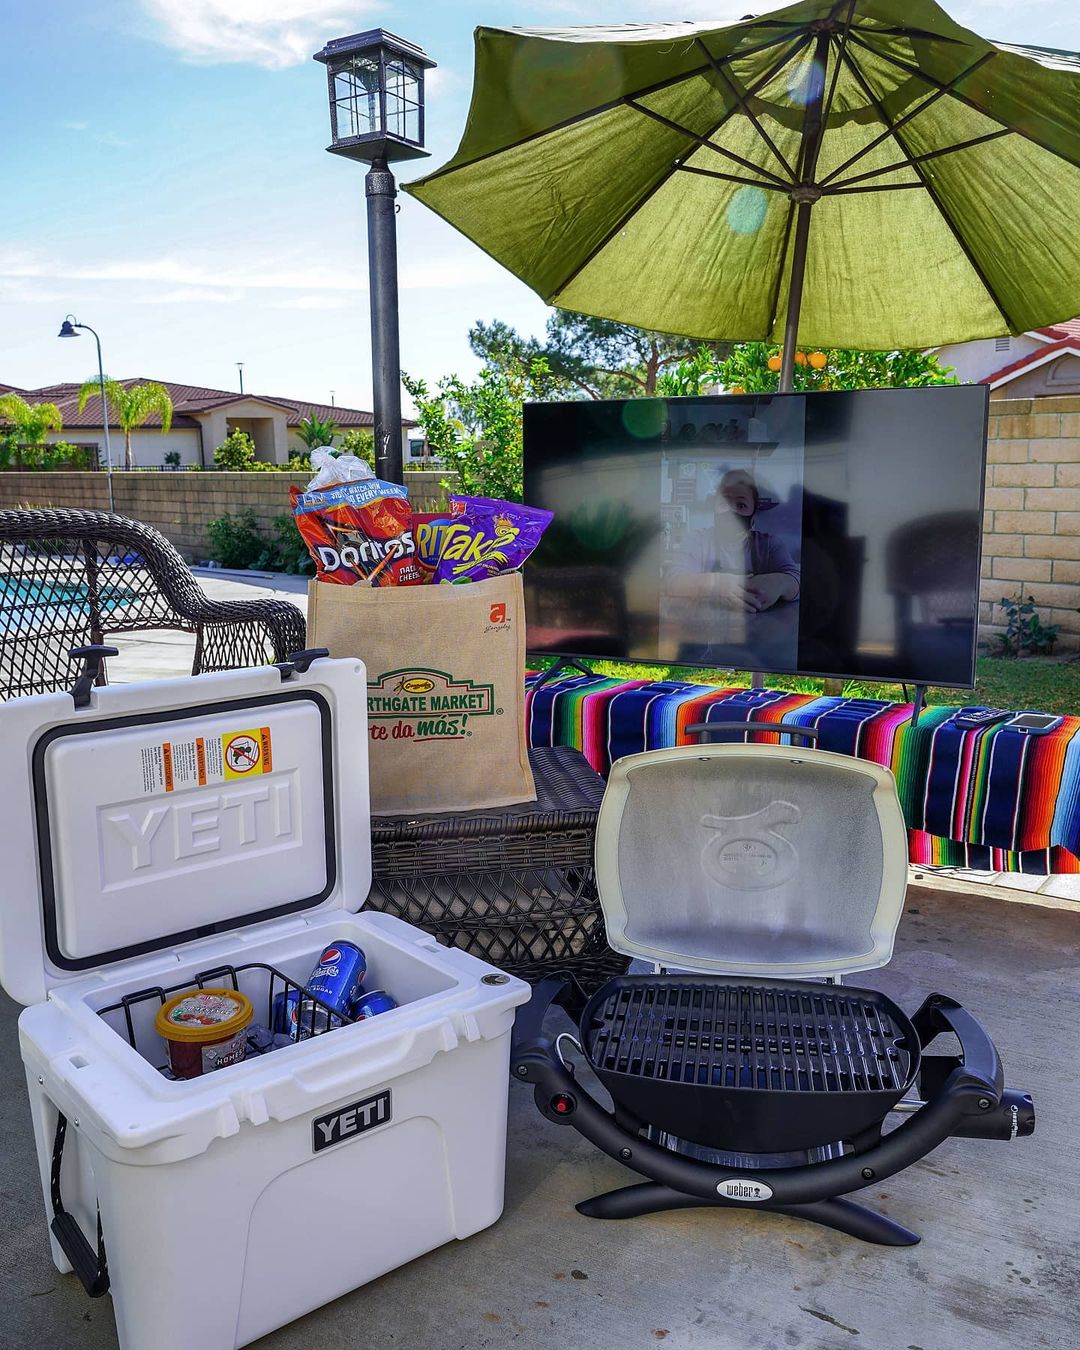 Backyard Tailgate Grill and Cooler. Photo by Instagram user @lifewitherns